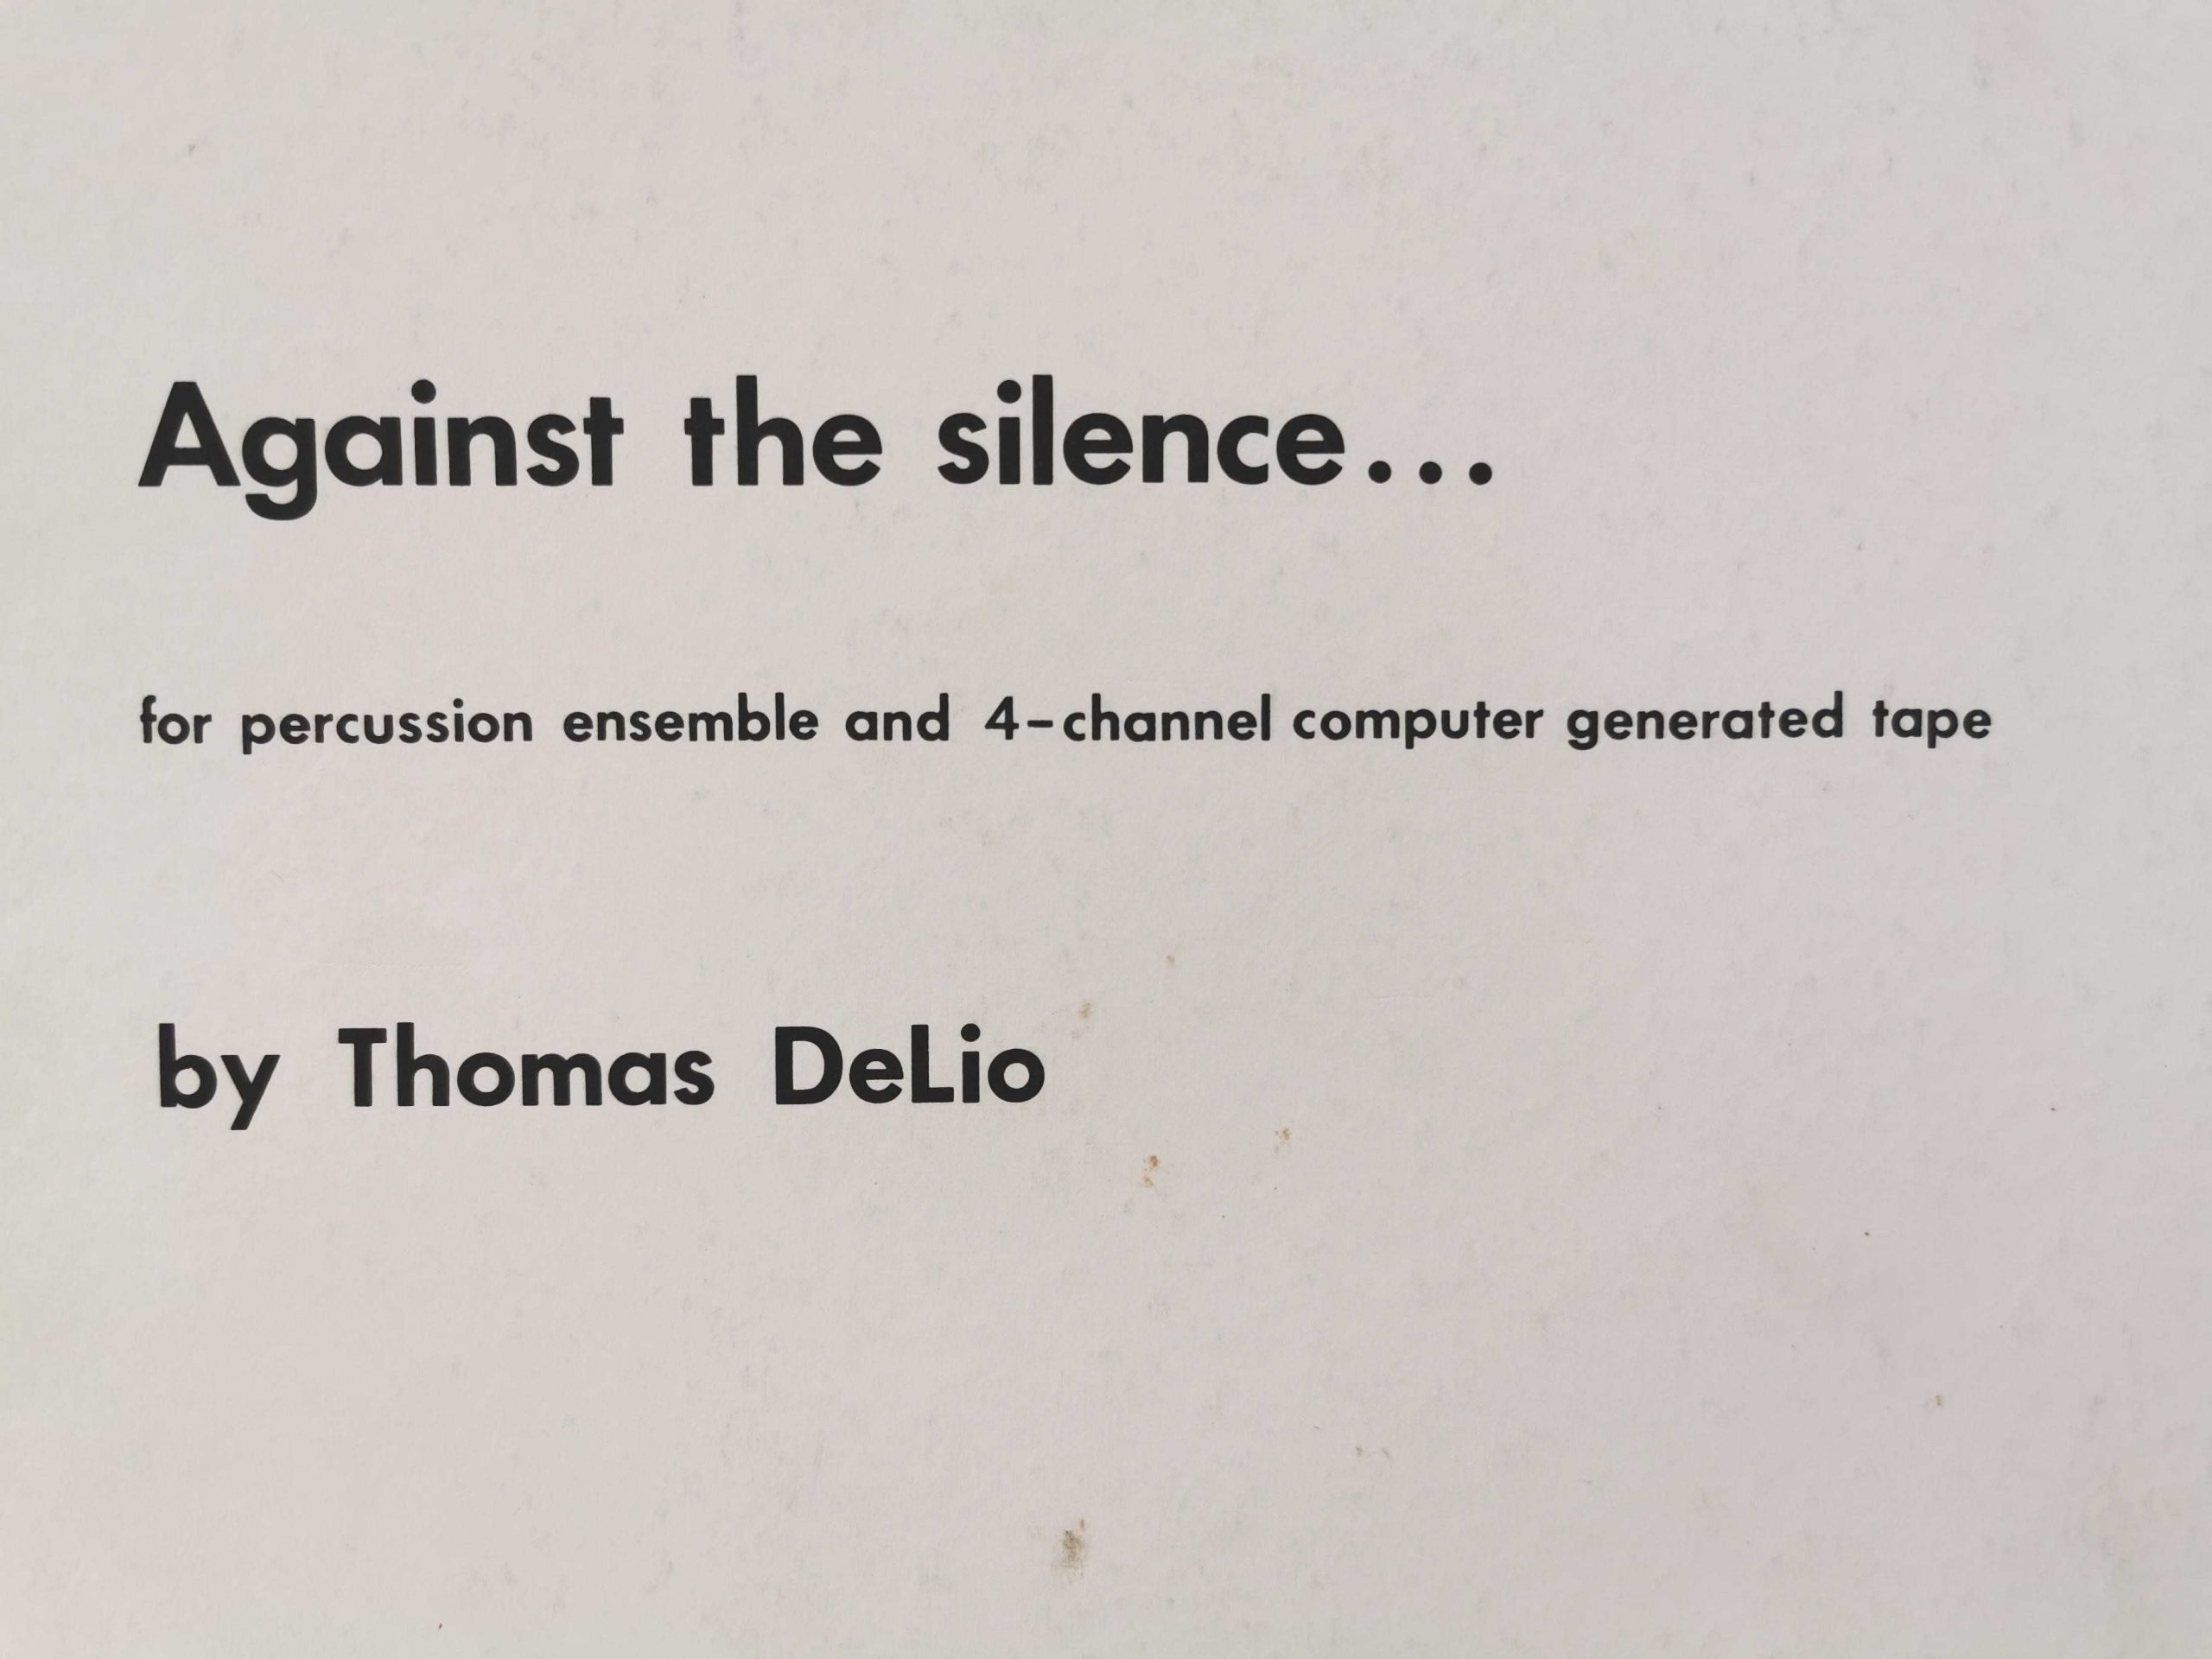 Against the silence... by Thomas Delio